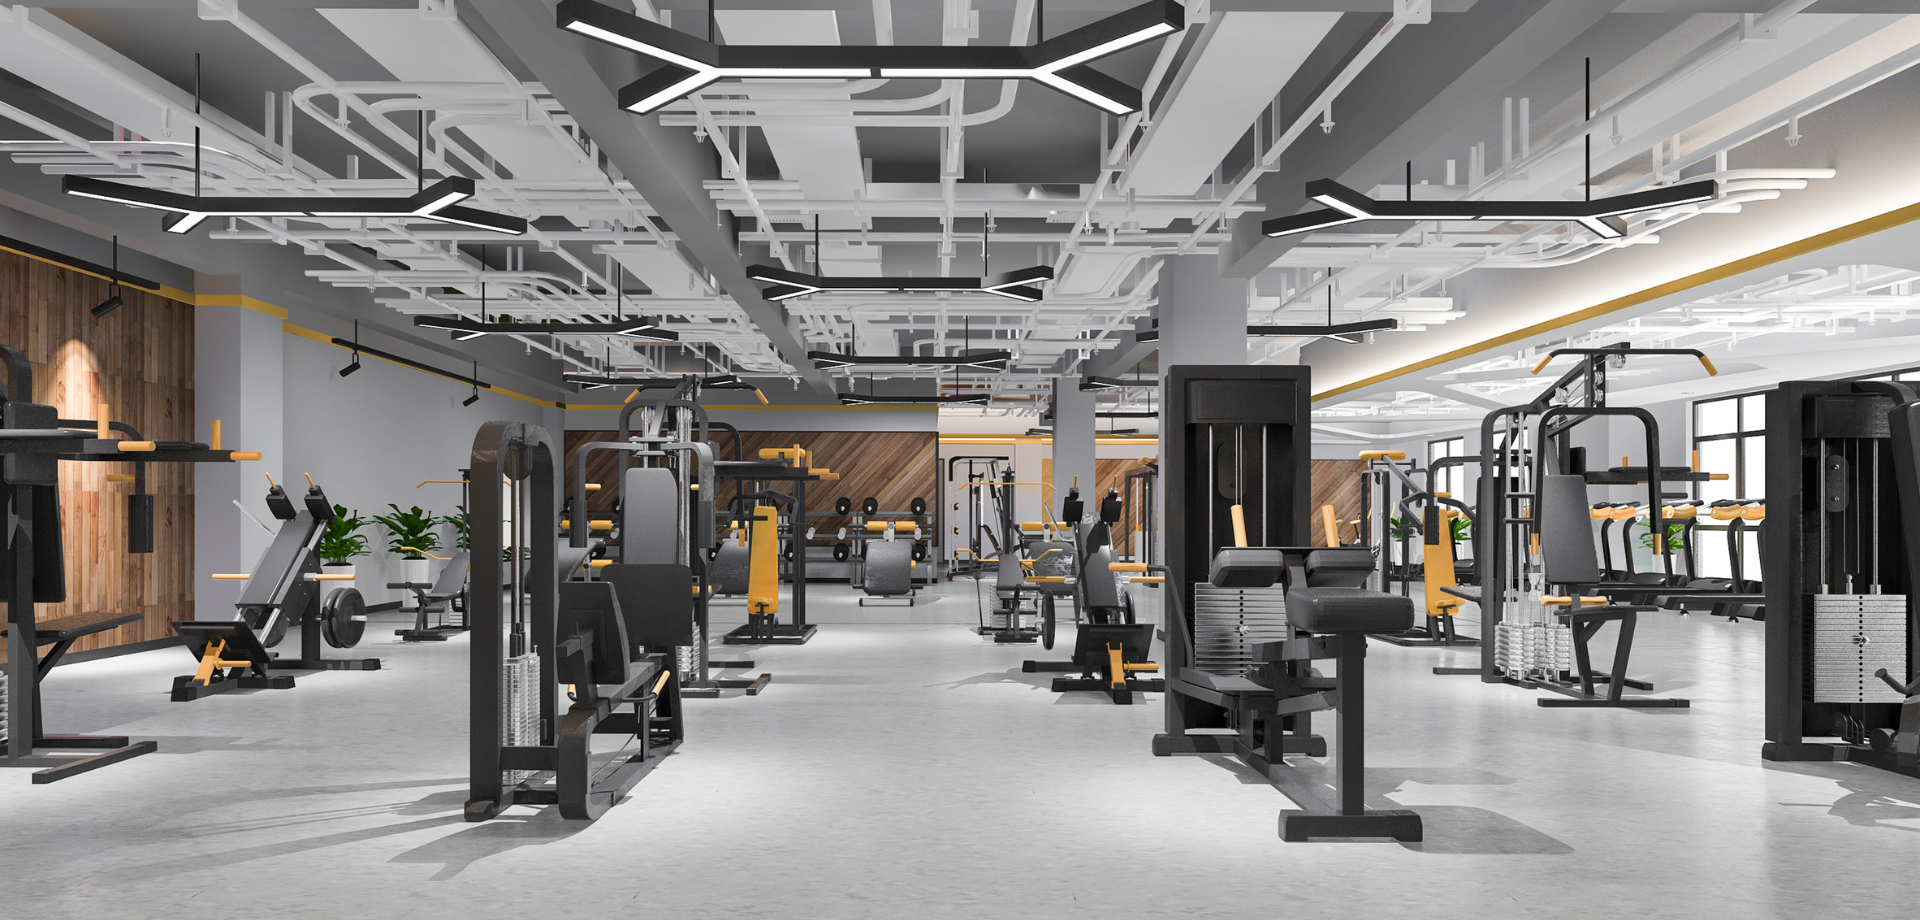 Fitness Center Cleaning Services